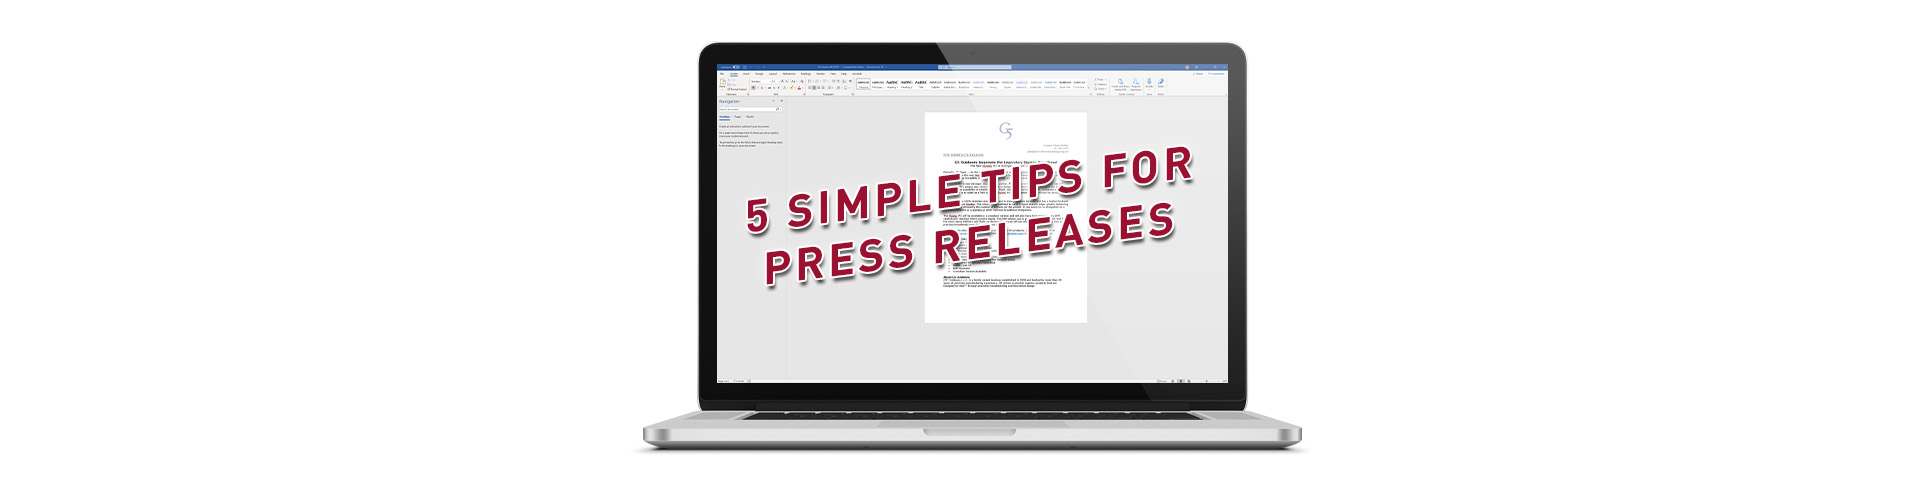 Getting The Most Out Of Your Press Release